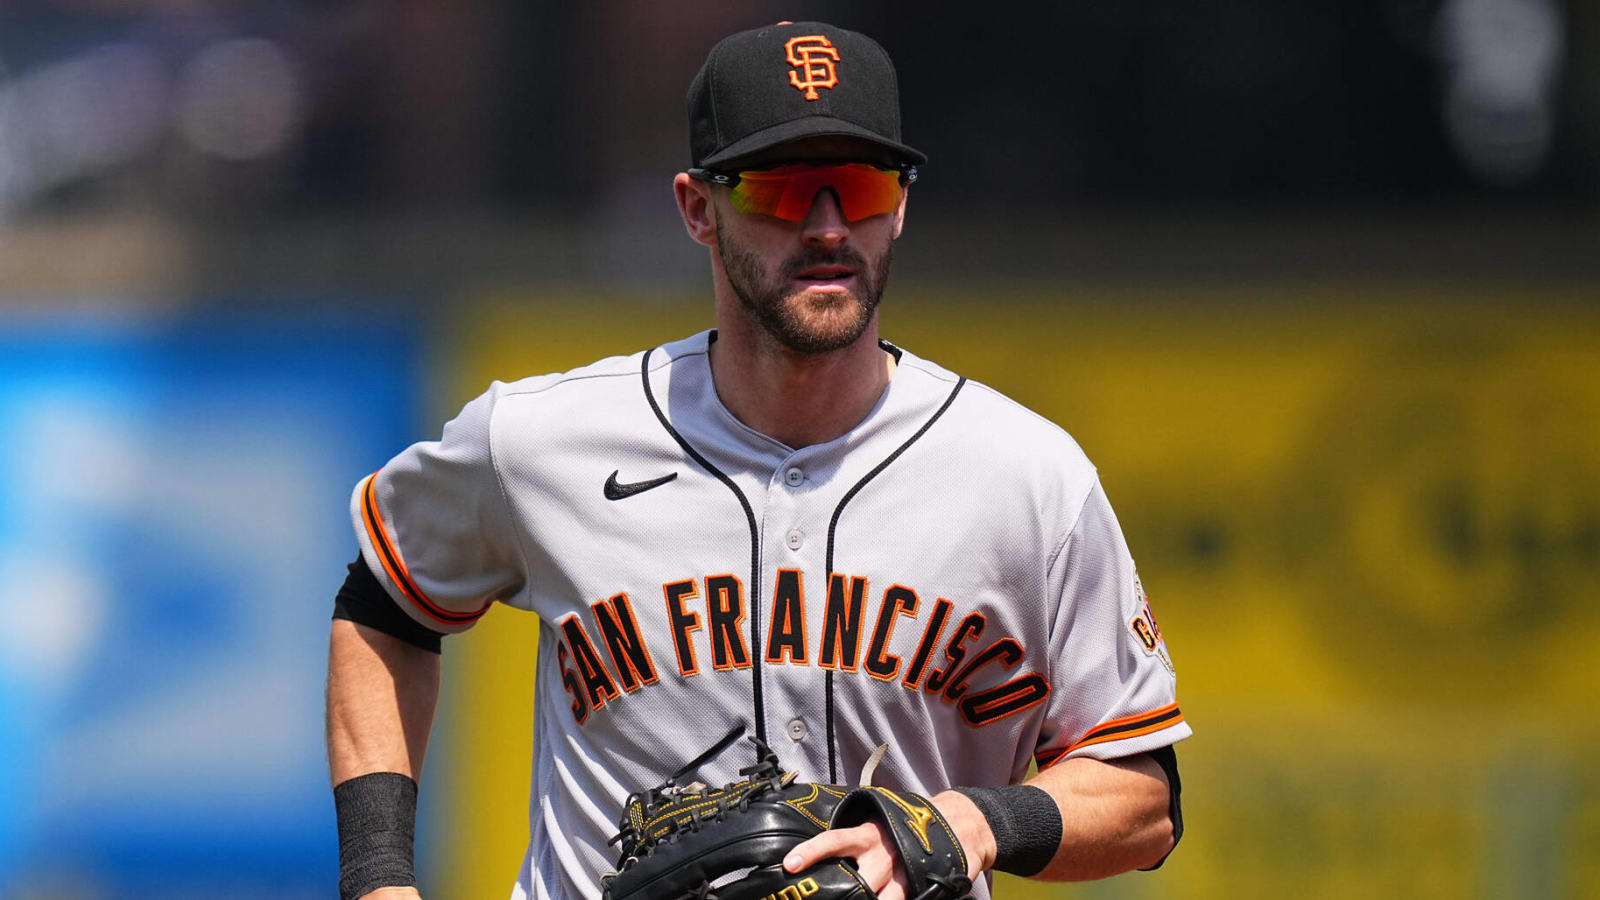 Giants place Steven Duggar on IL, likely to select Luis Gonzalez